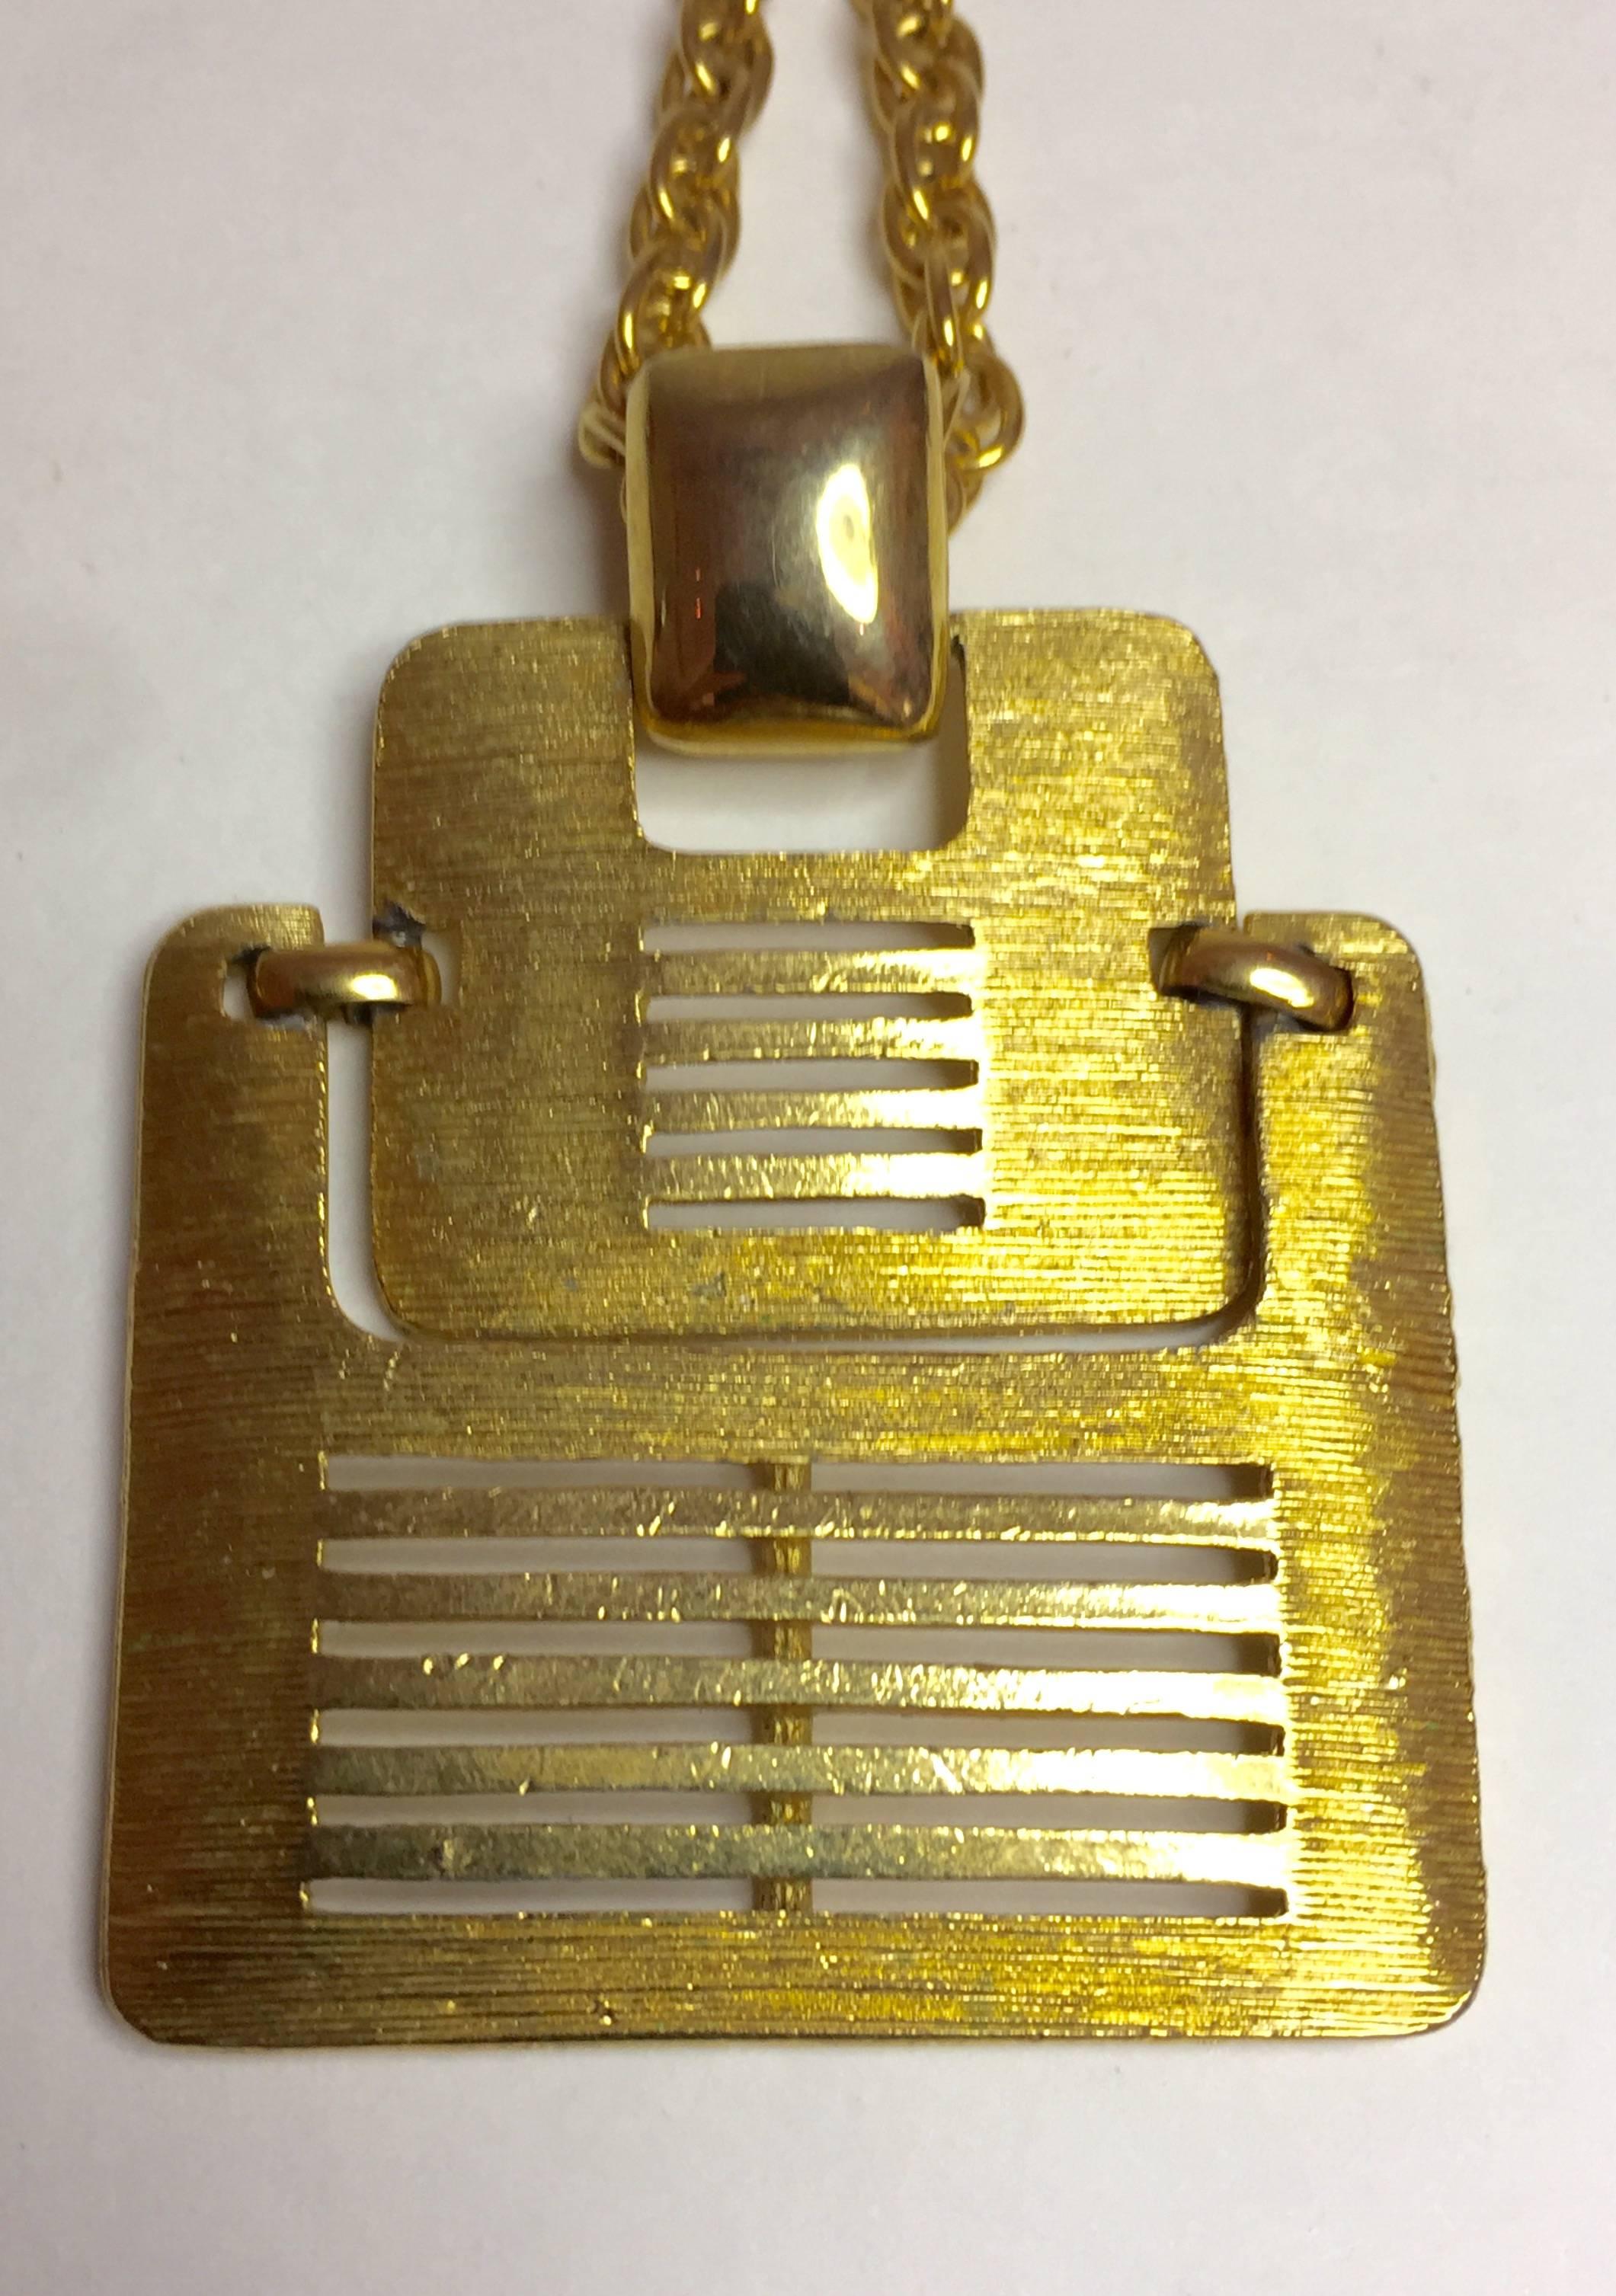 An unsigned beauty, this 1960s Brushed Goldtone Mid Century Modern Two piece Pendant Necklace on Chain, has louvered horizontal slats and a pivoting mid section allowing for movement while being worn.  Although unsigned, it ressembles TRIFARI and